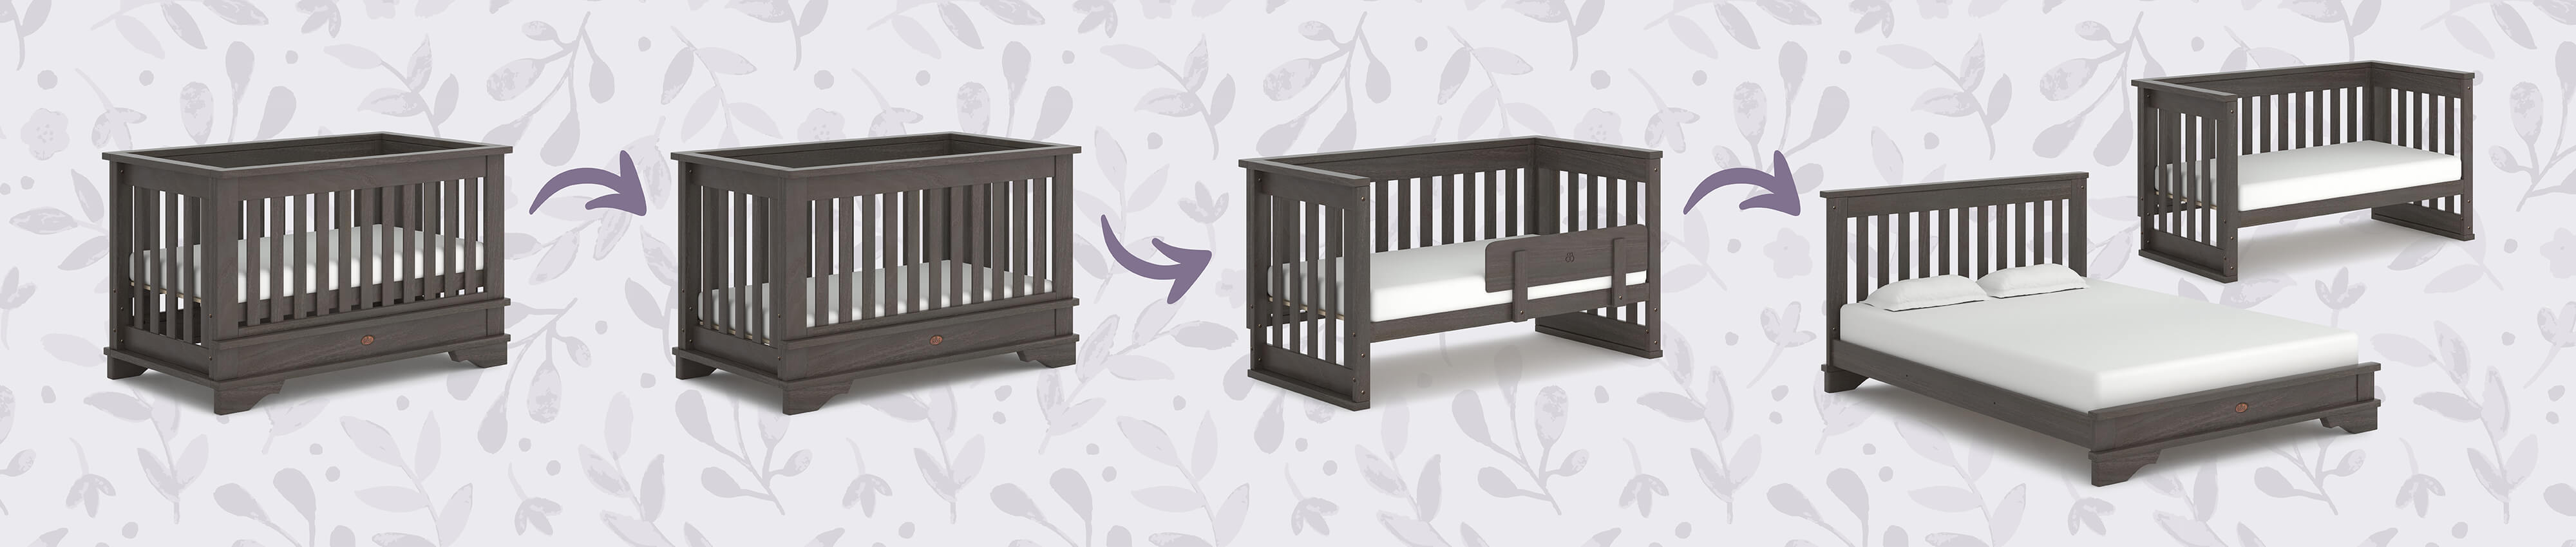 cot bed that transforms into sofa, toddler bed and double bed